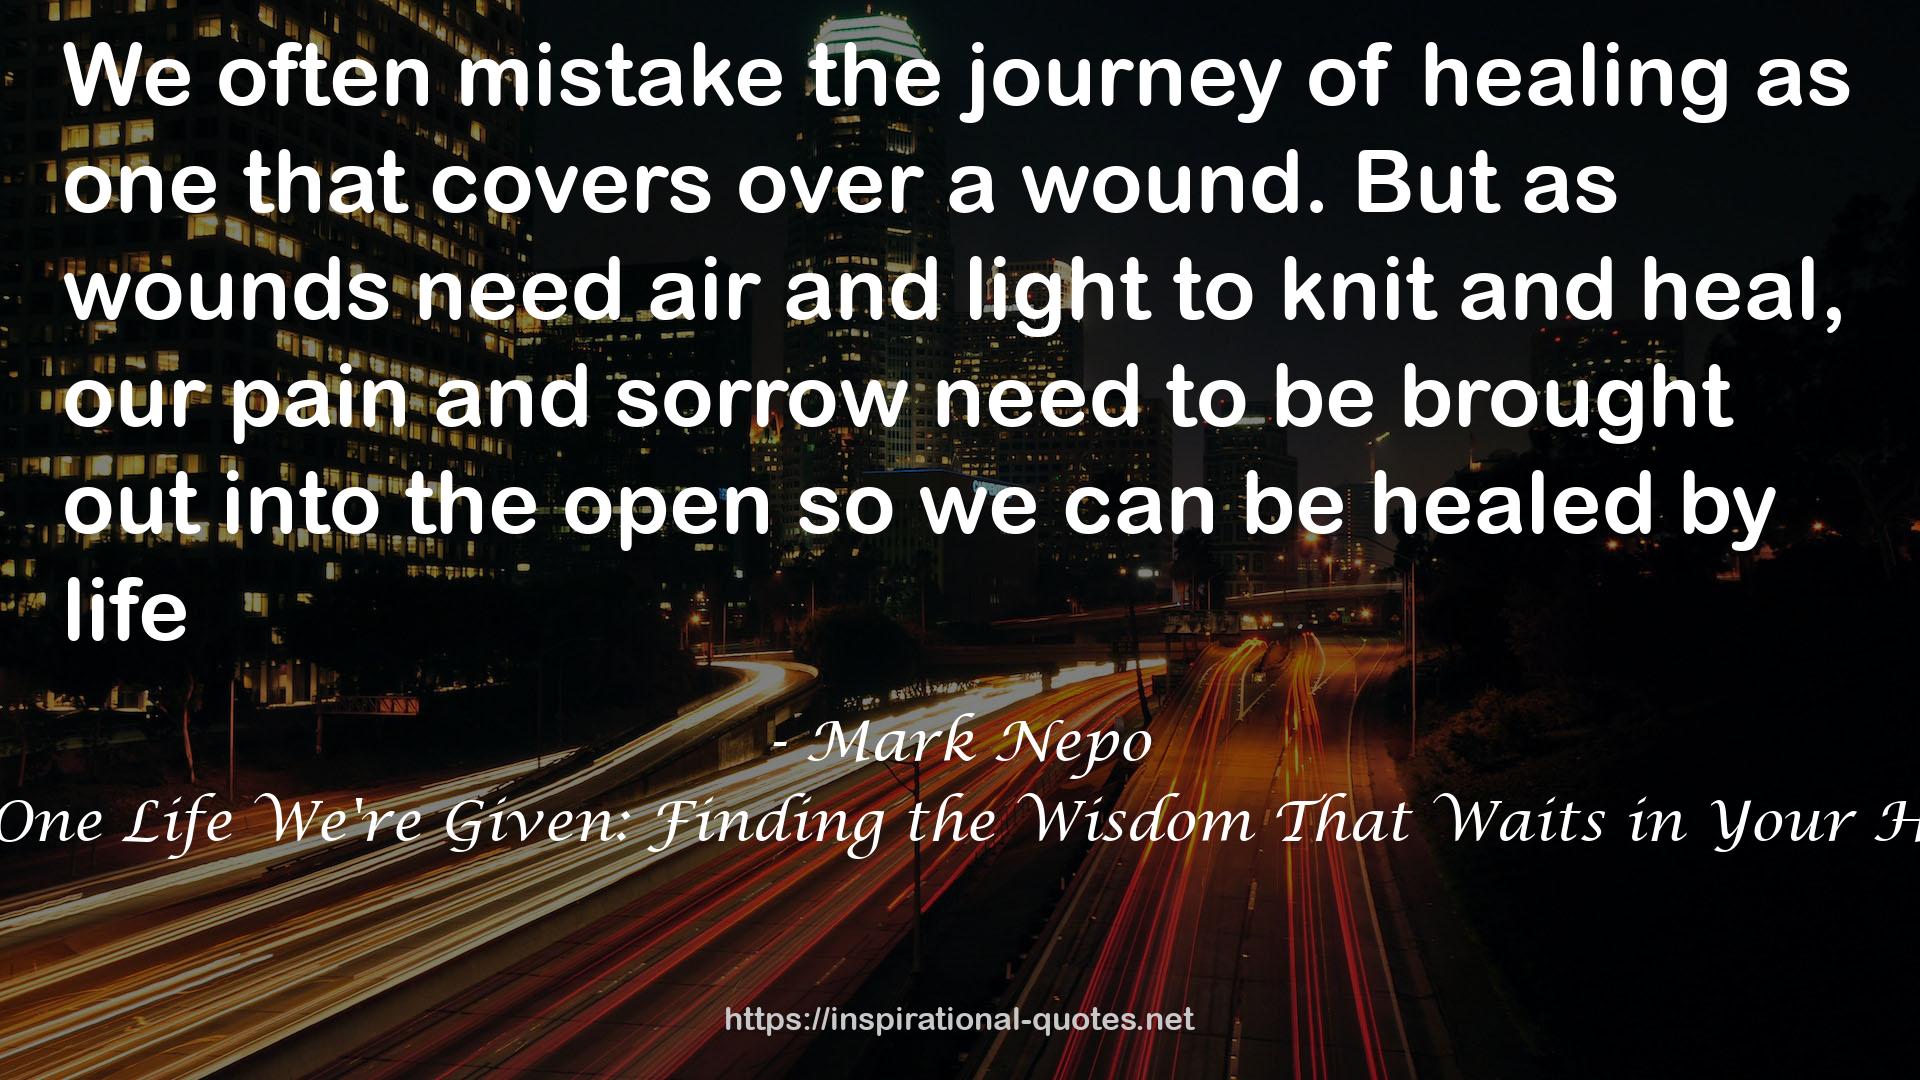 The One Life We're Given: Finding the Wisdom That Waits in Your Heart QUOTES